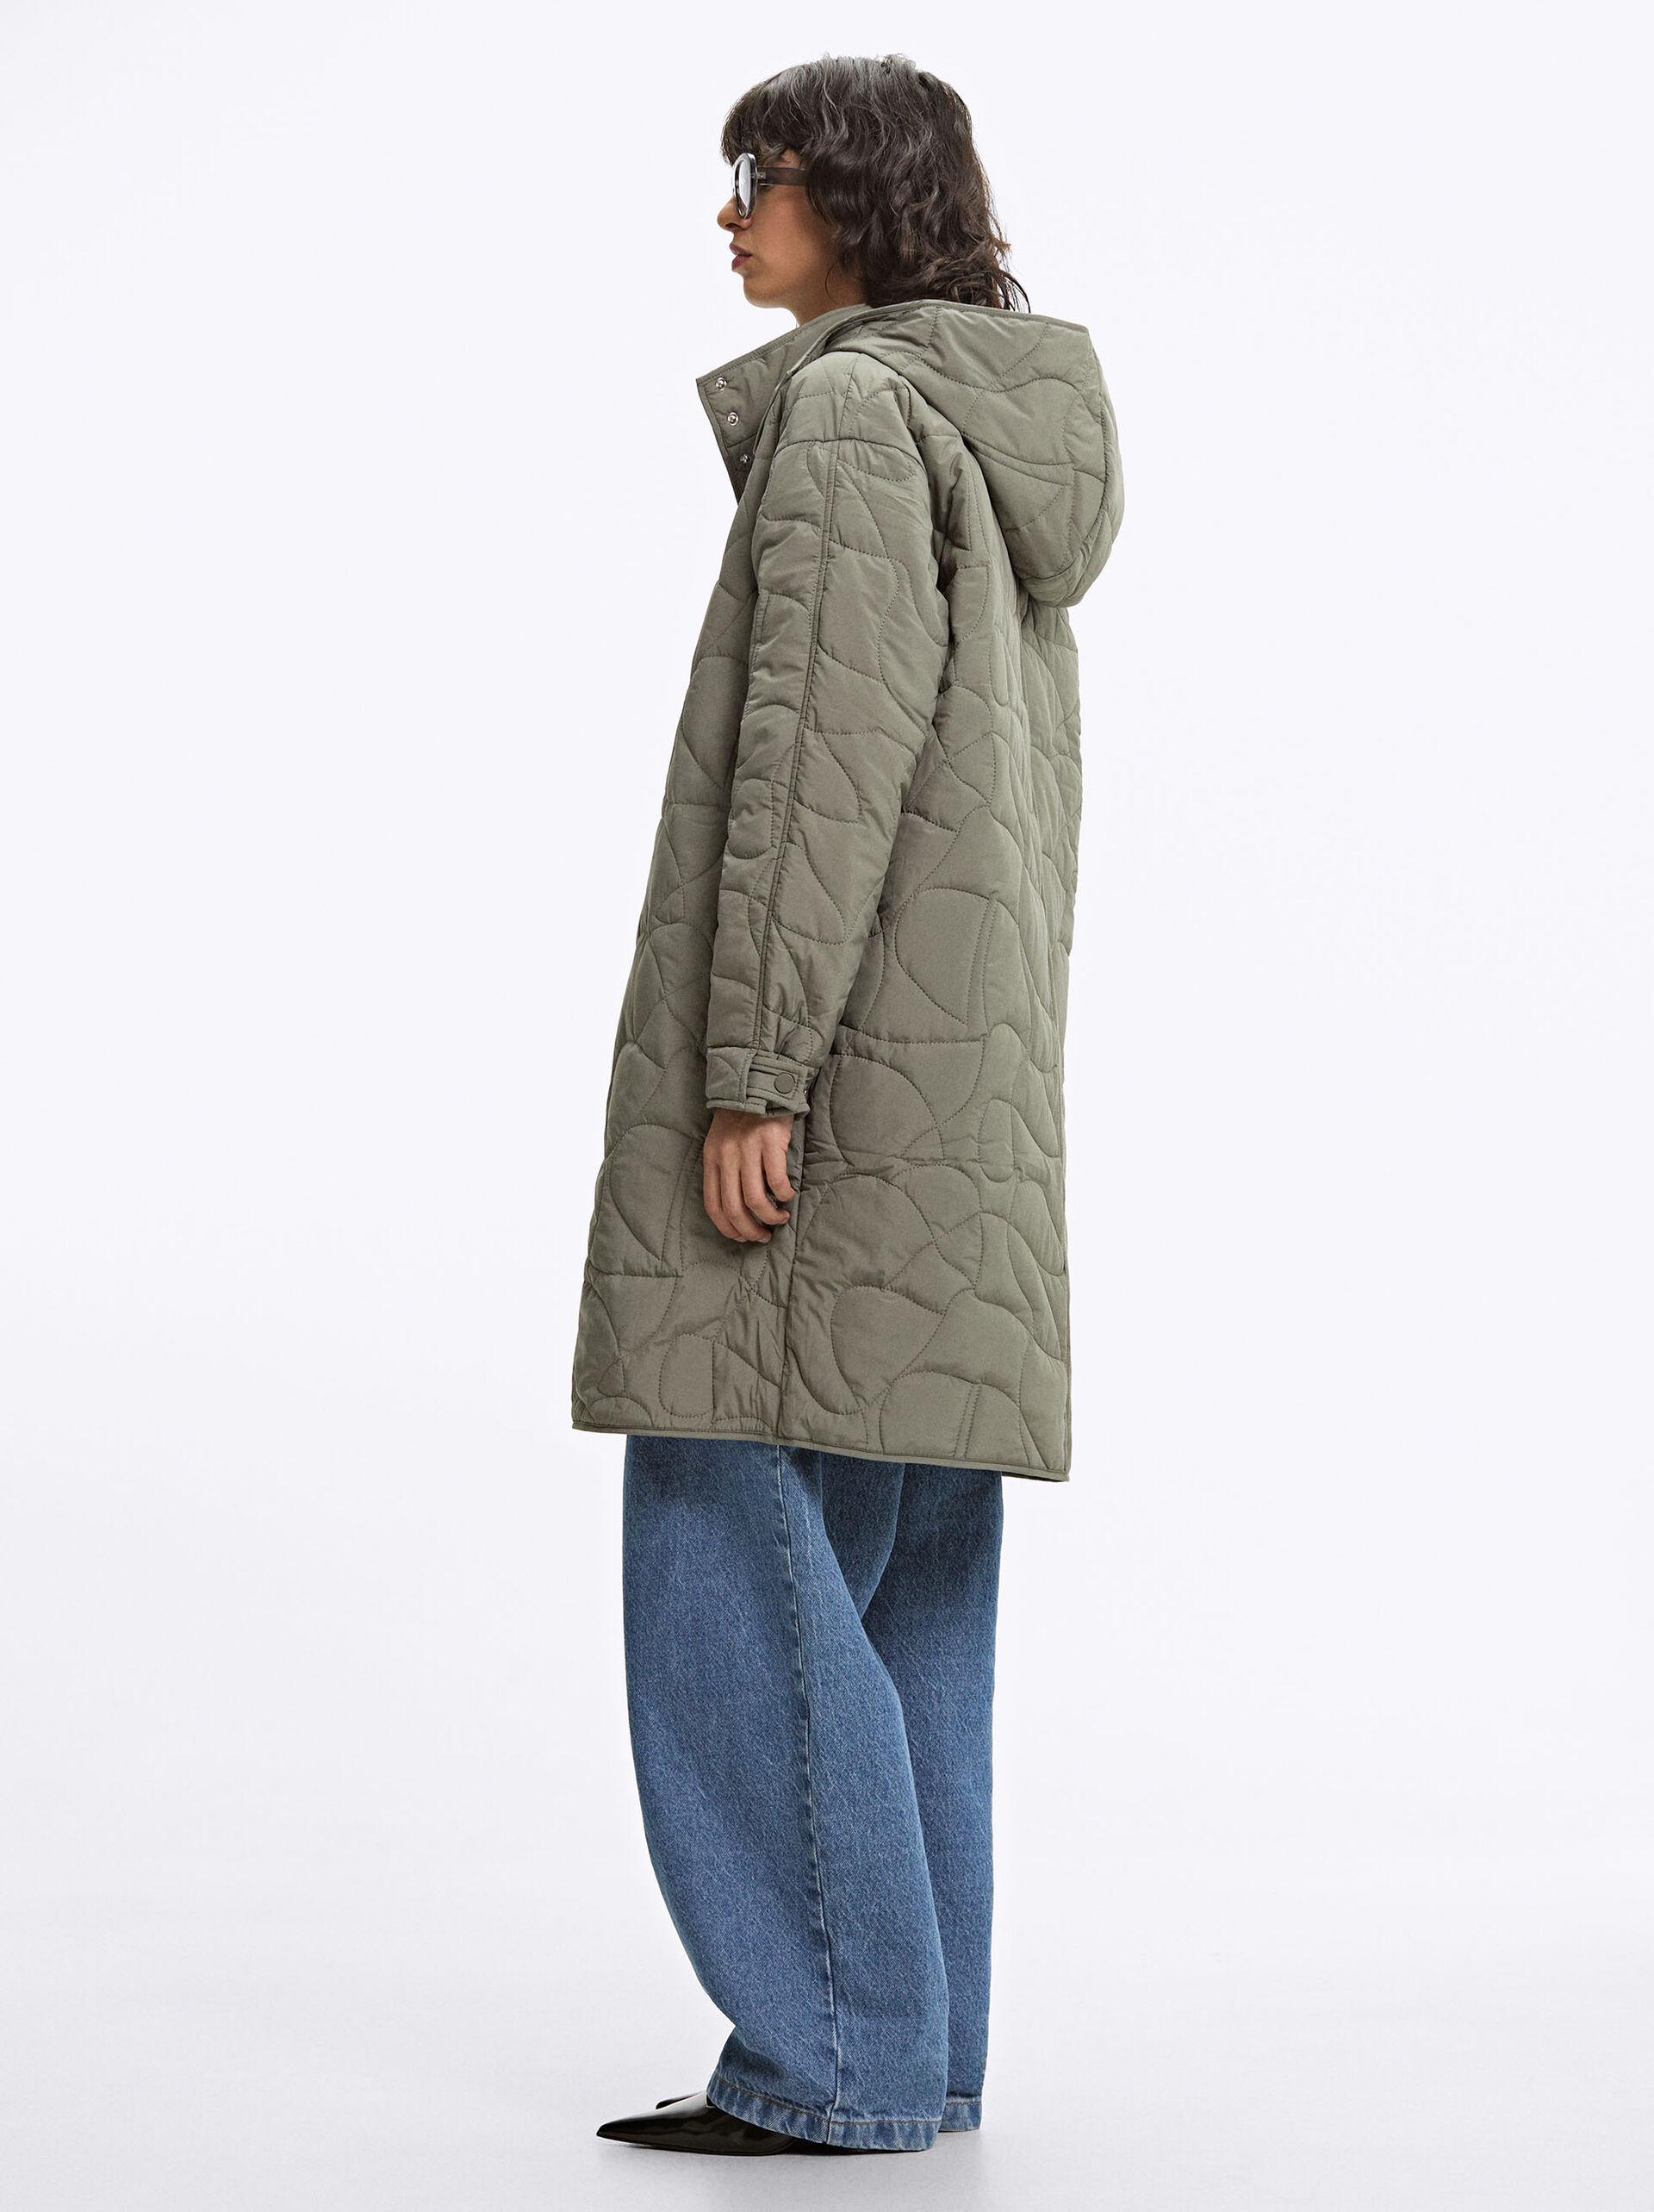 Long Coat With Hood image number 3.0